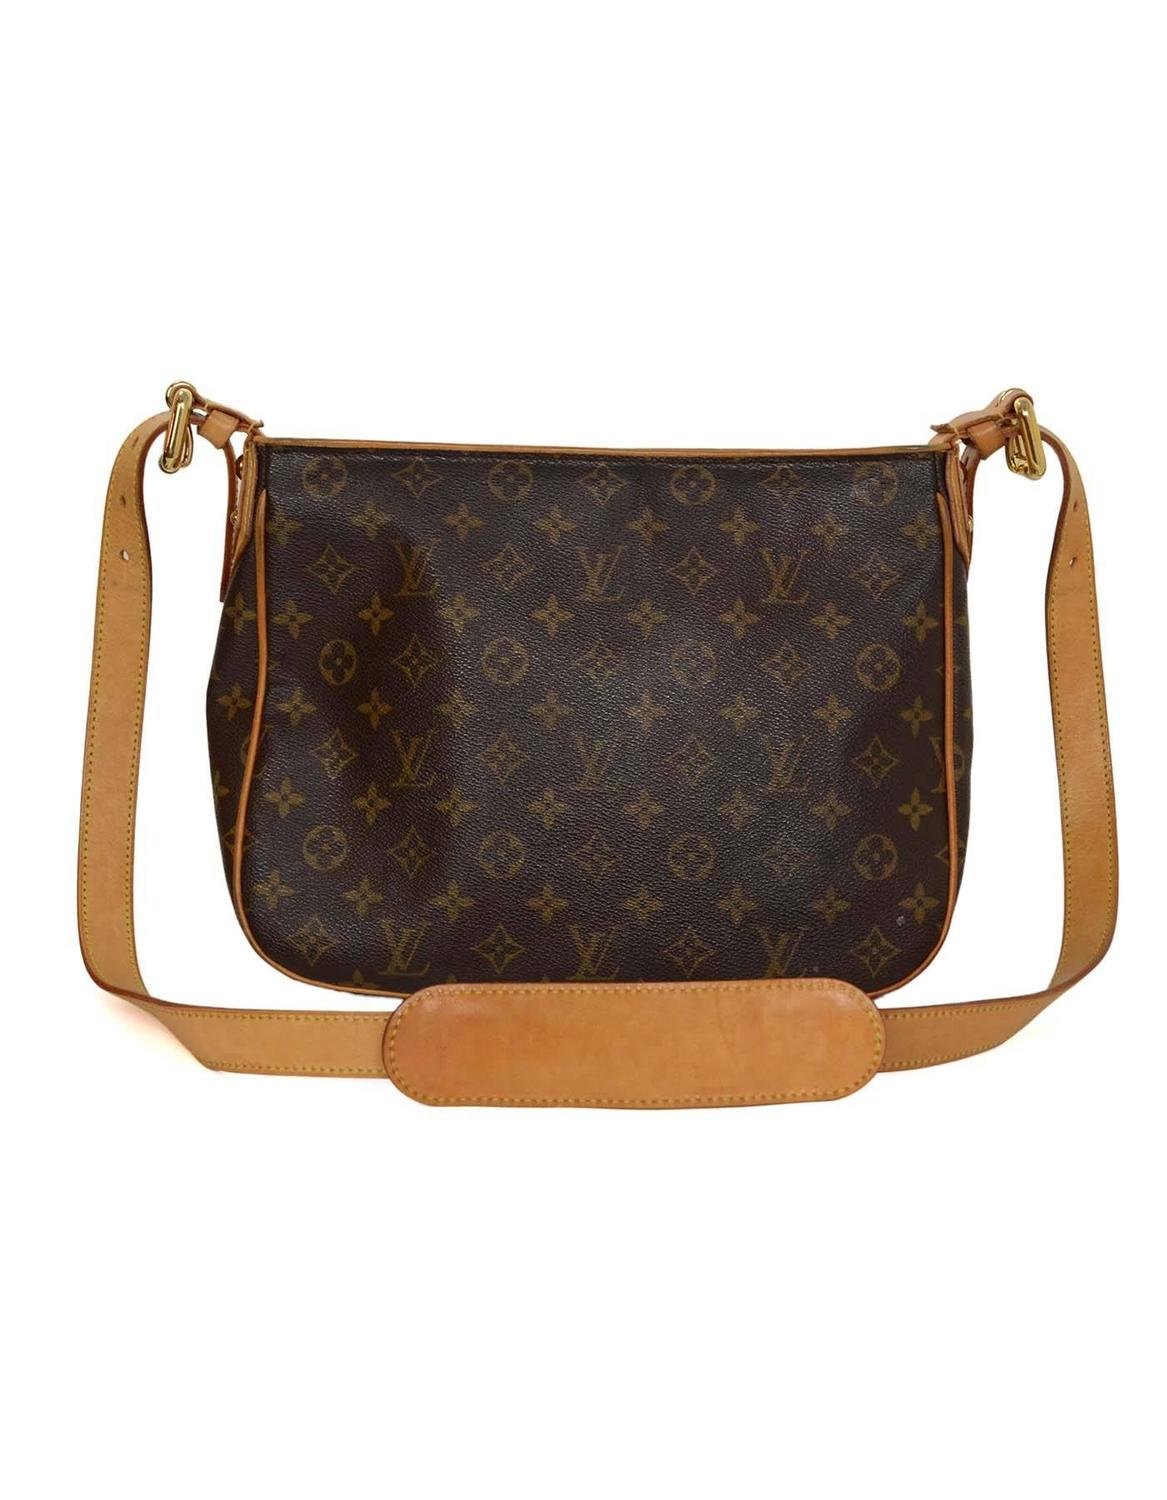 Louis Vuitton Crossbody Handbags | Confederated Tribes of the Umatilla Indian Reservation